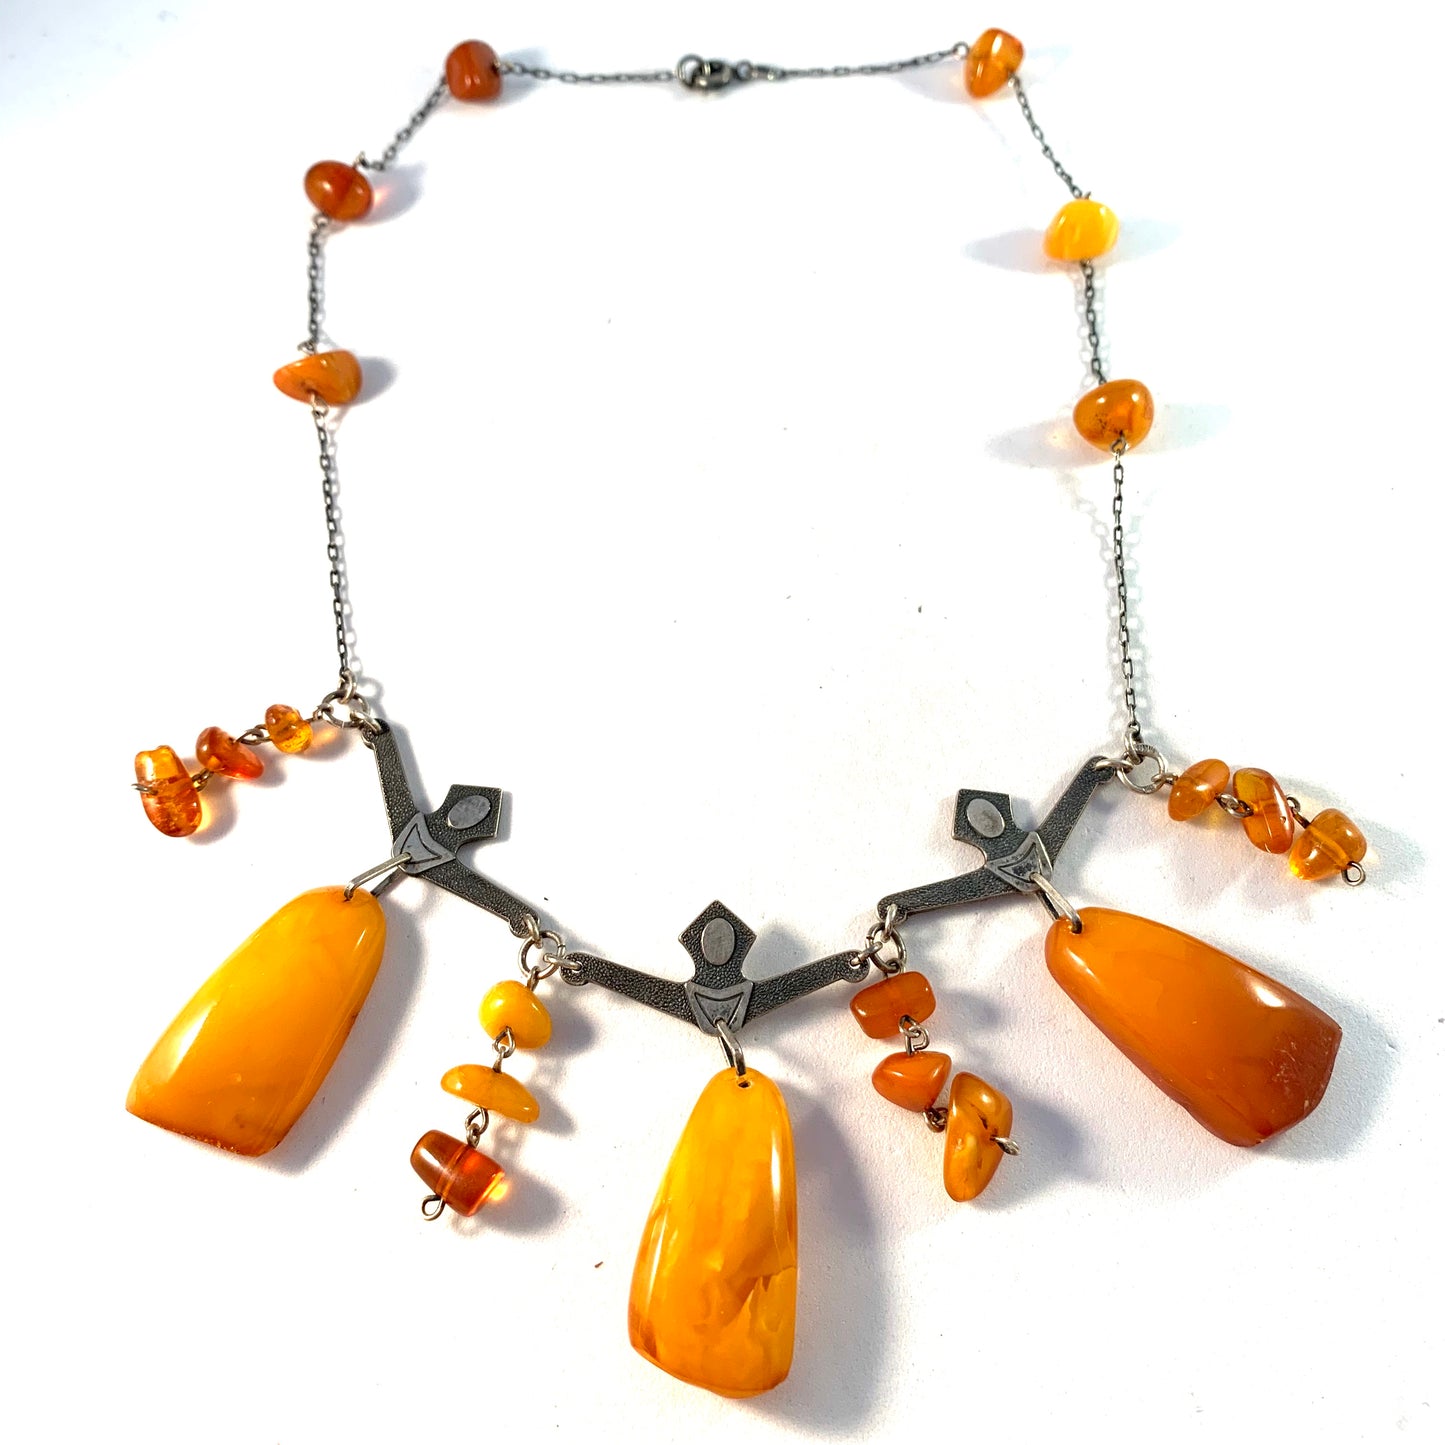 Russia, Soviet Era 1960s Solid 875 Silver Baltic Amber Necklace.